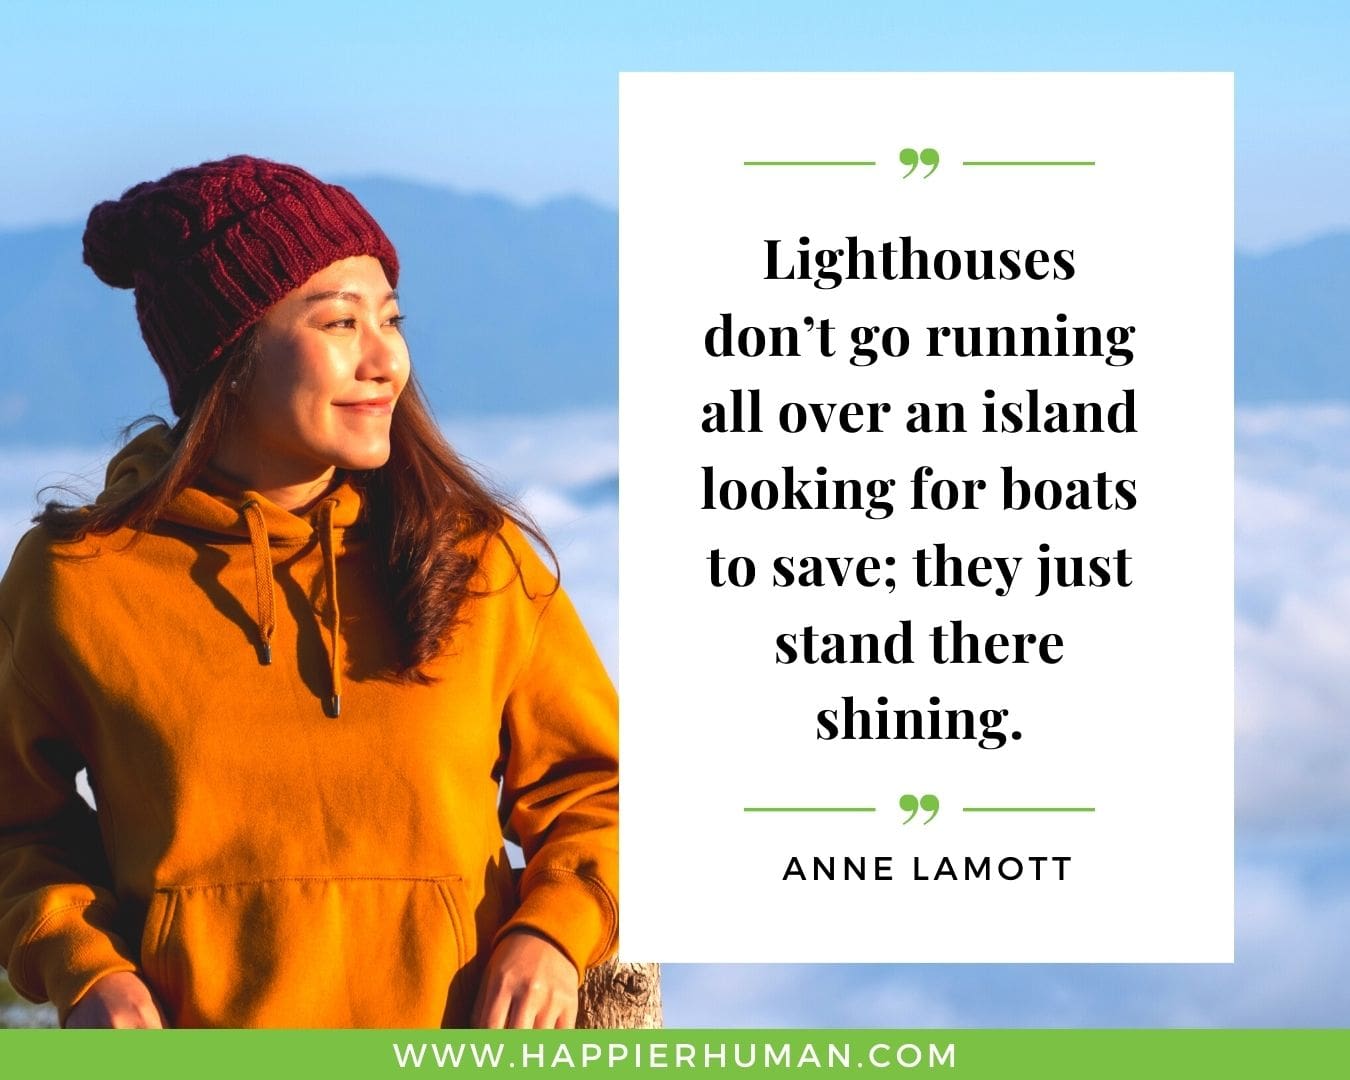 Introvert Quotes - “Lighthouses don’t go running all over an island looking for boats to save; they just stand there shining.” – Anne Lamott